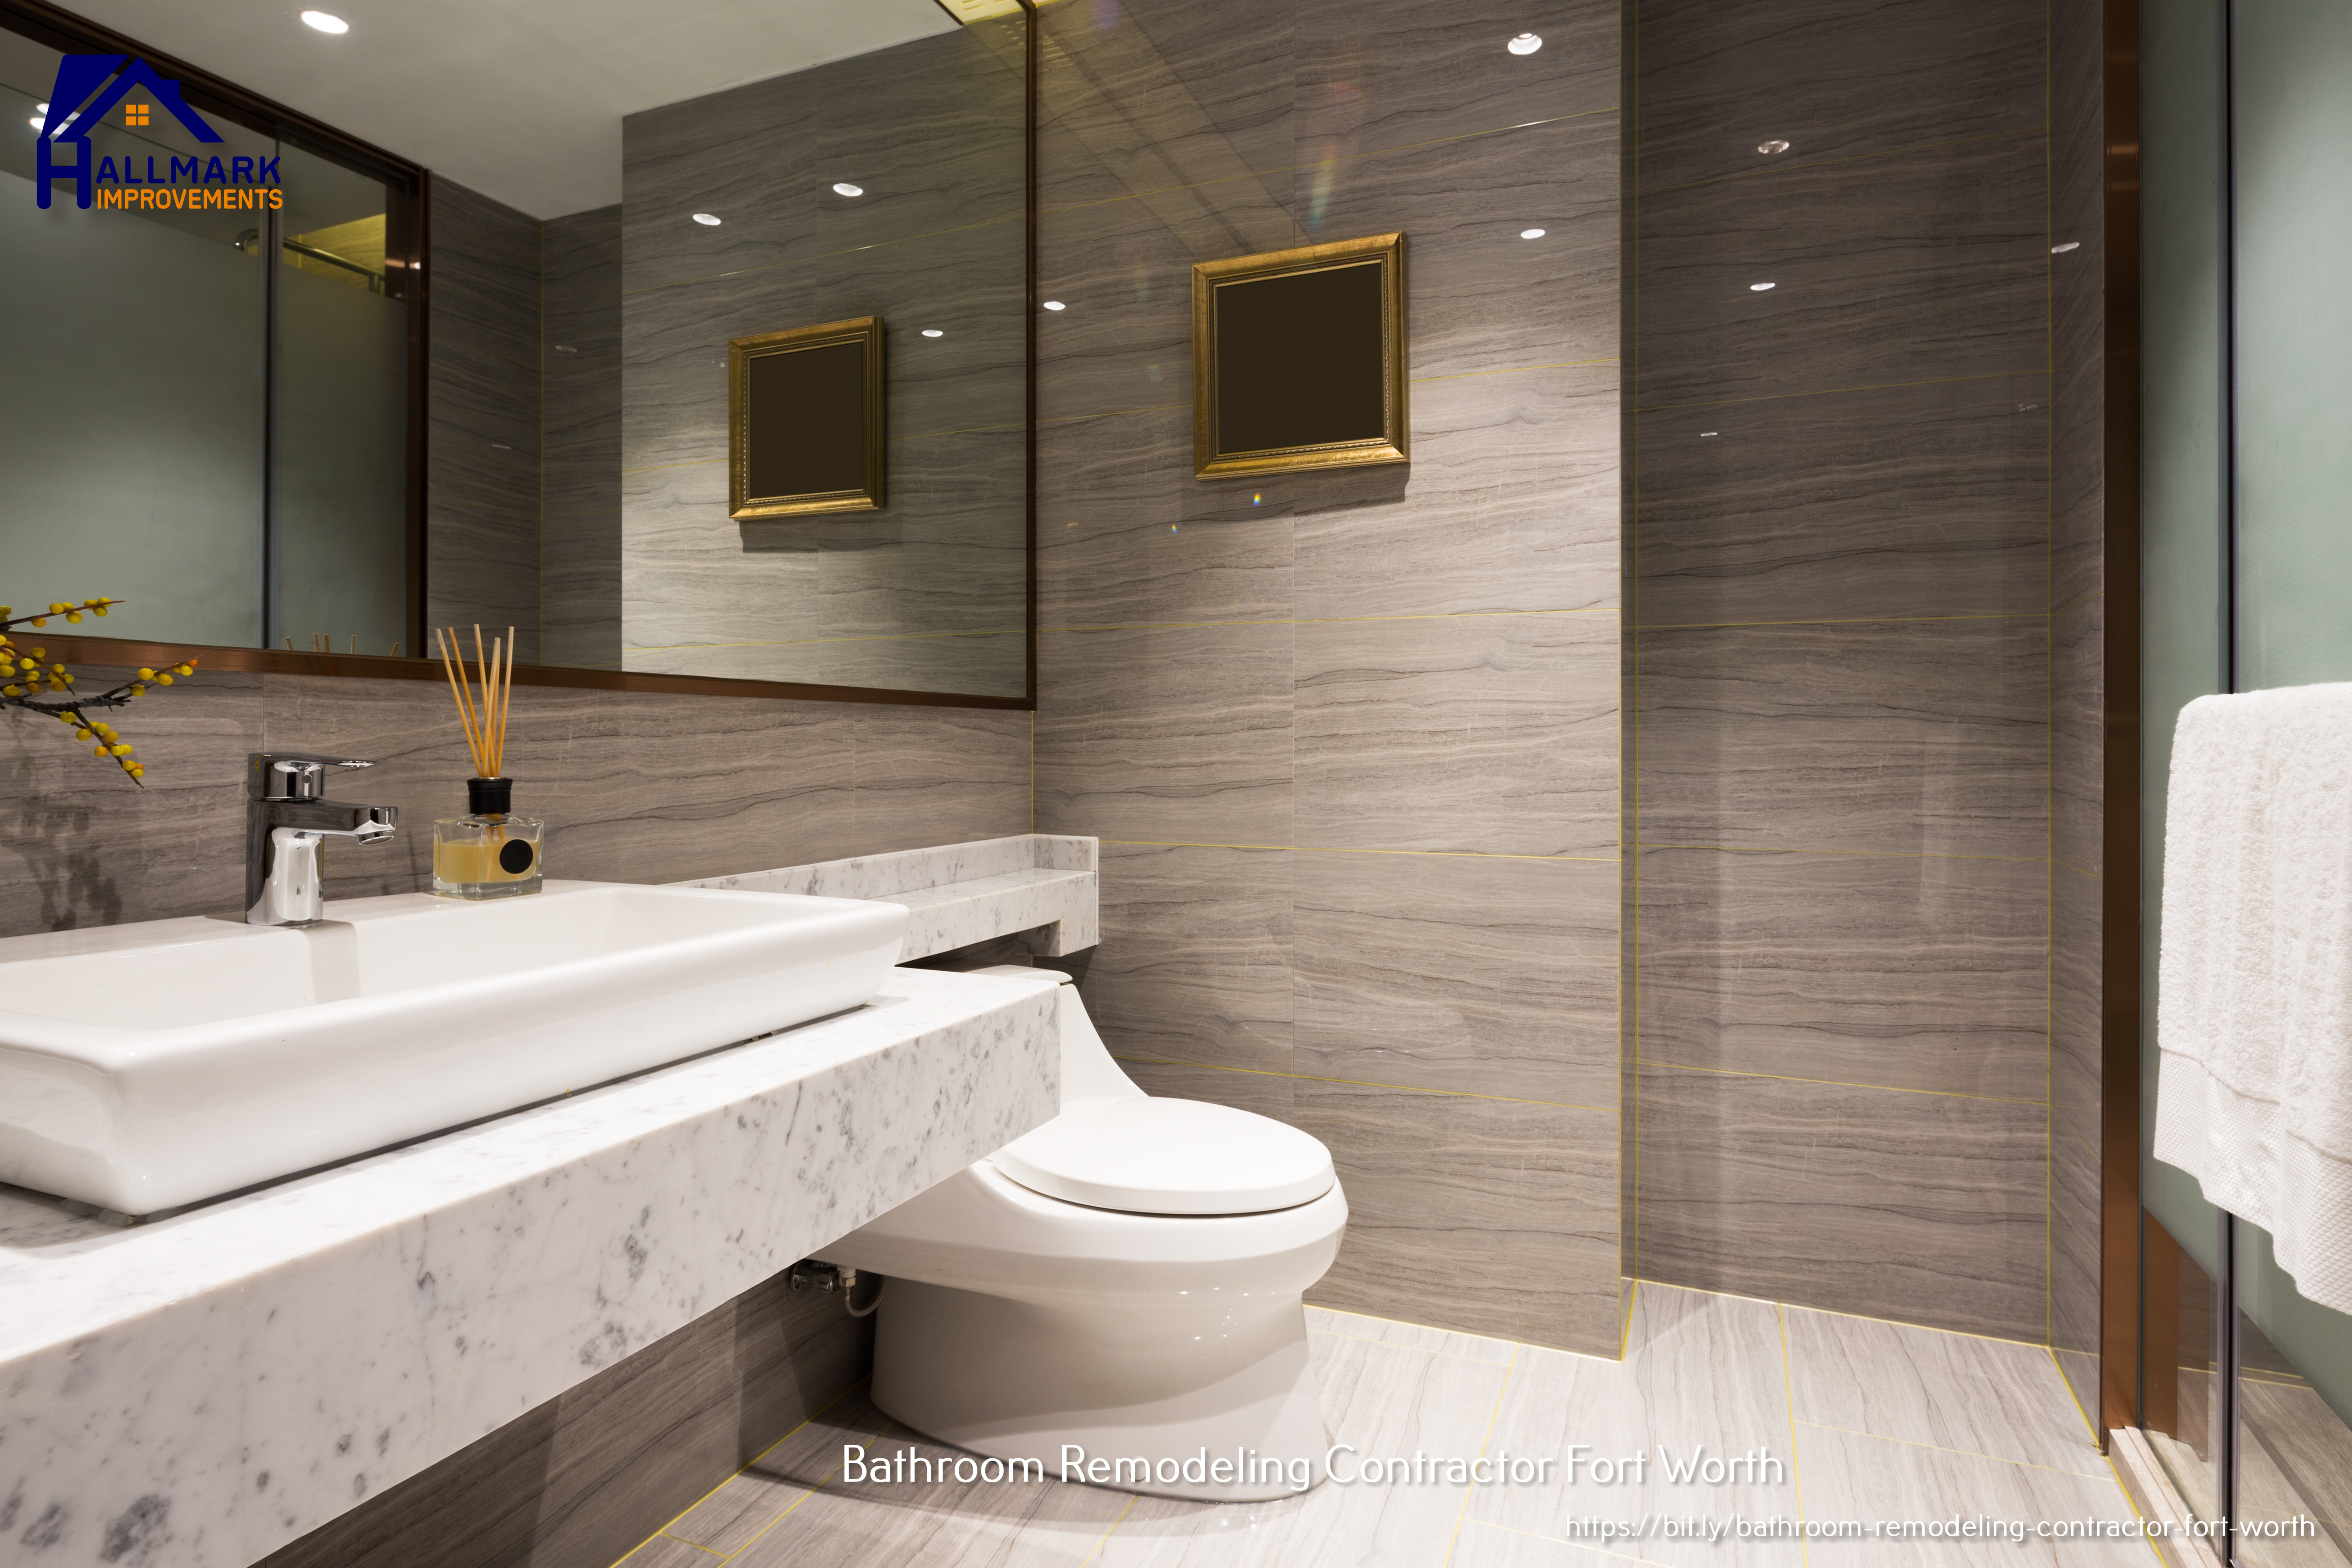 Hallmark Improvements Explains Why Locals Should Invest in Professional Bathroom Remodeling